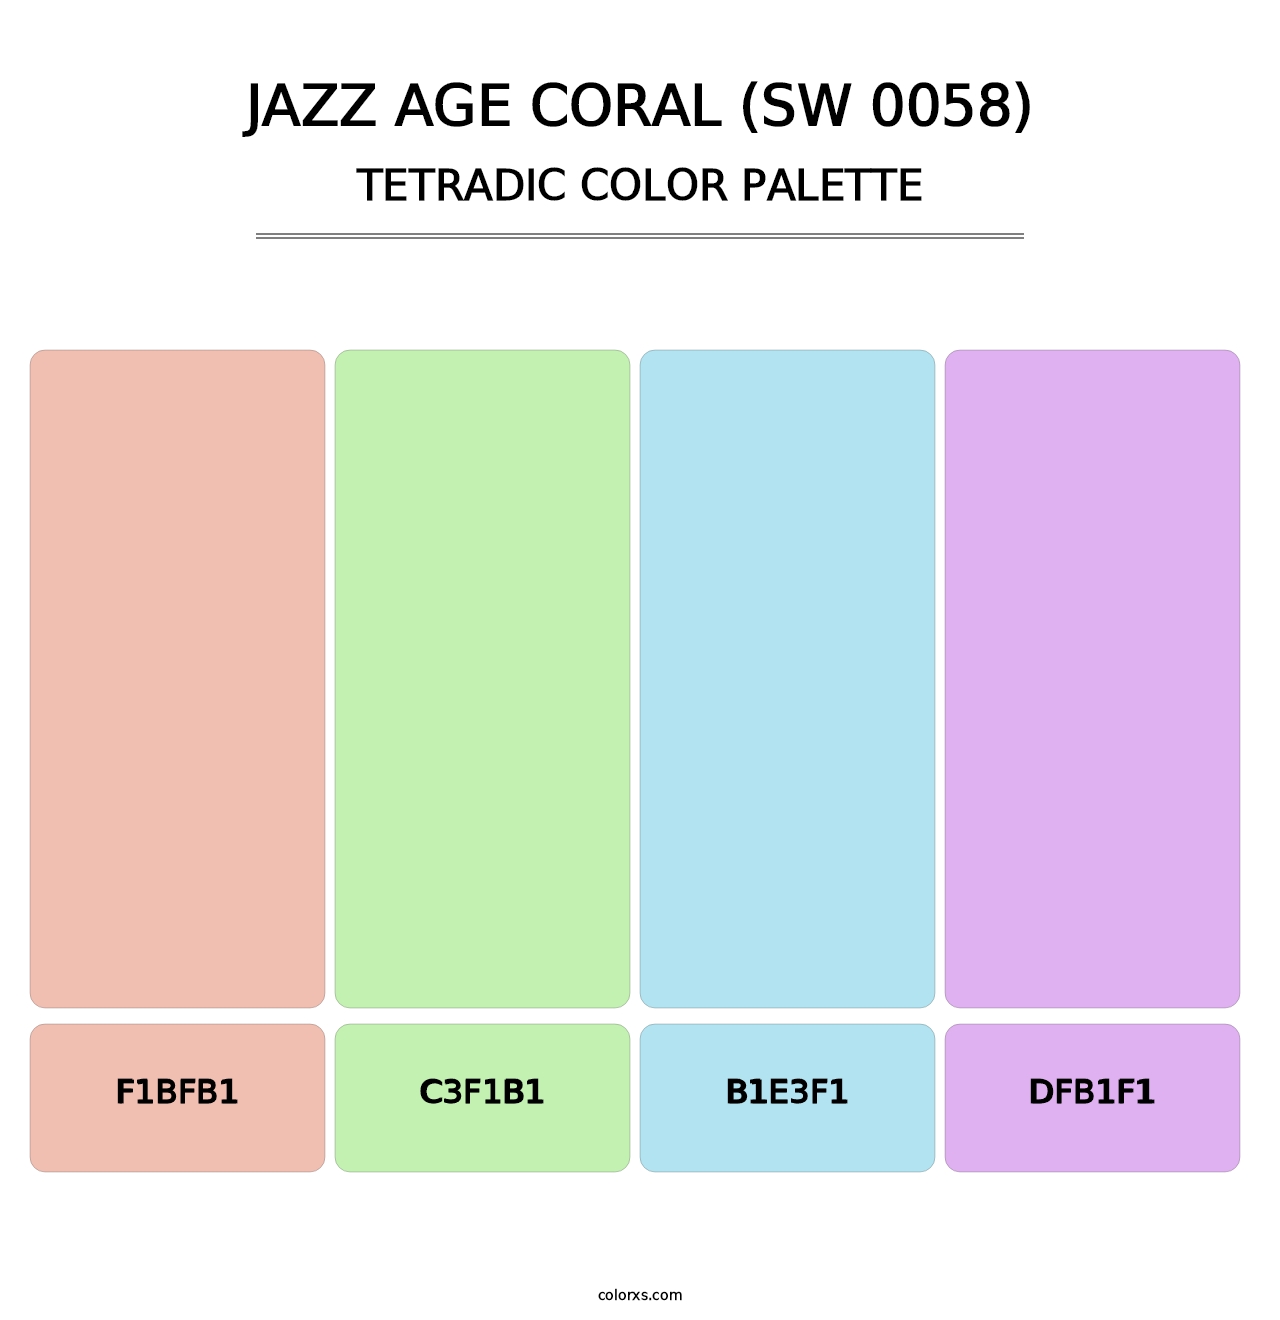 Jazz Age Coral (SW 0058) - Tetradic Color Palette